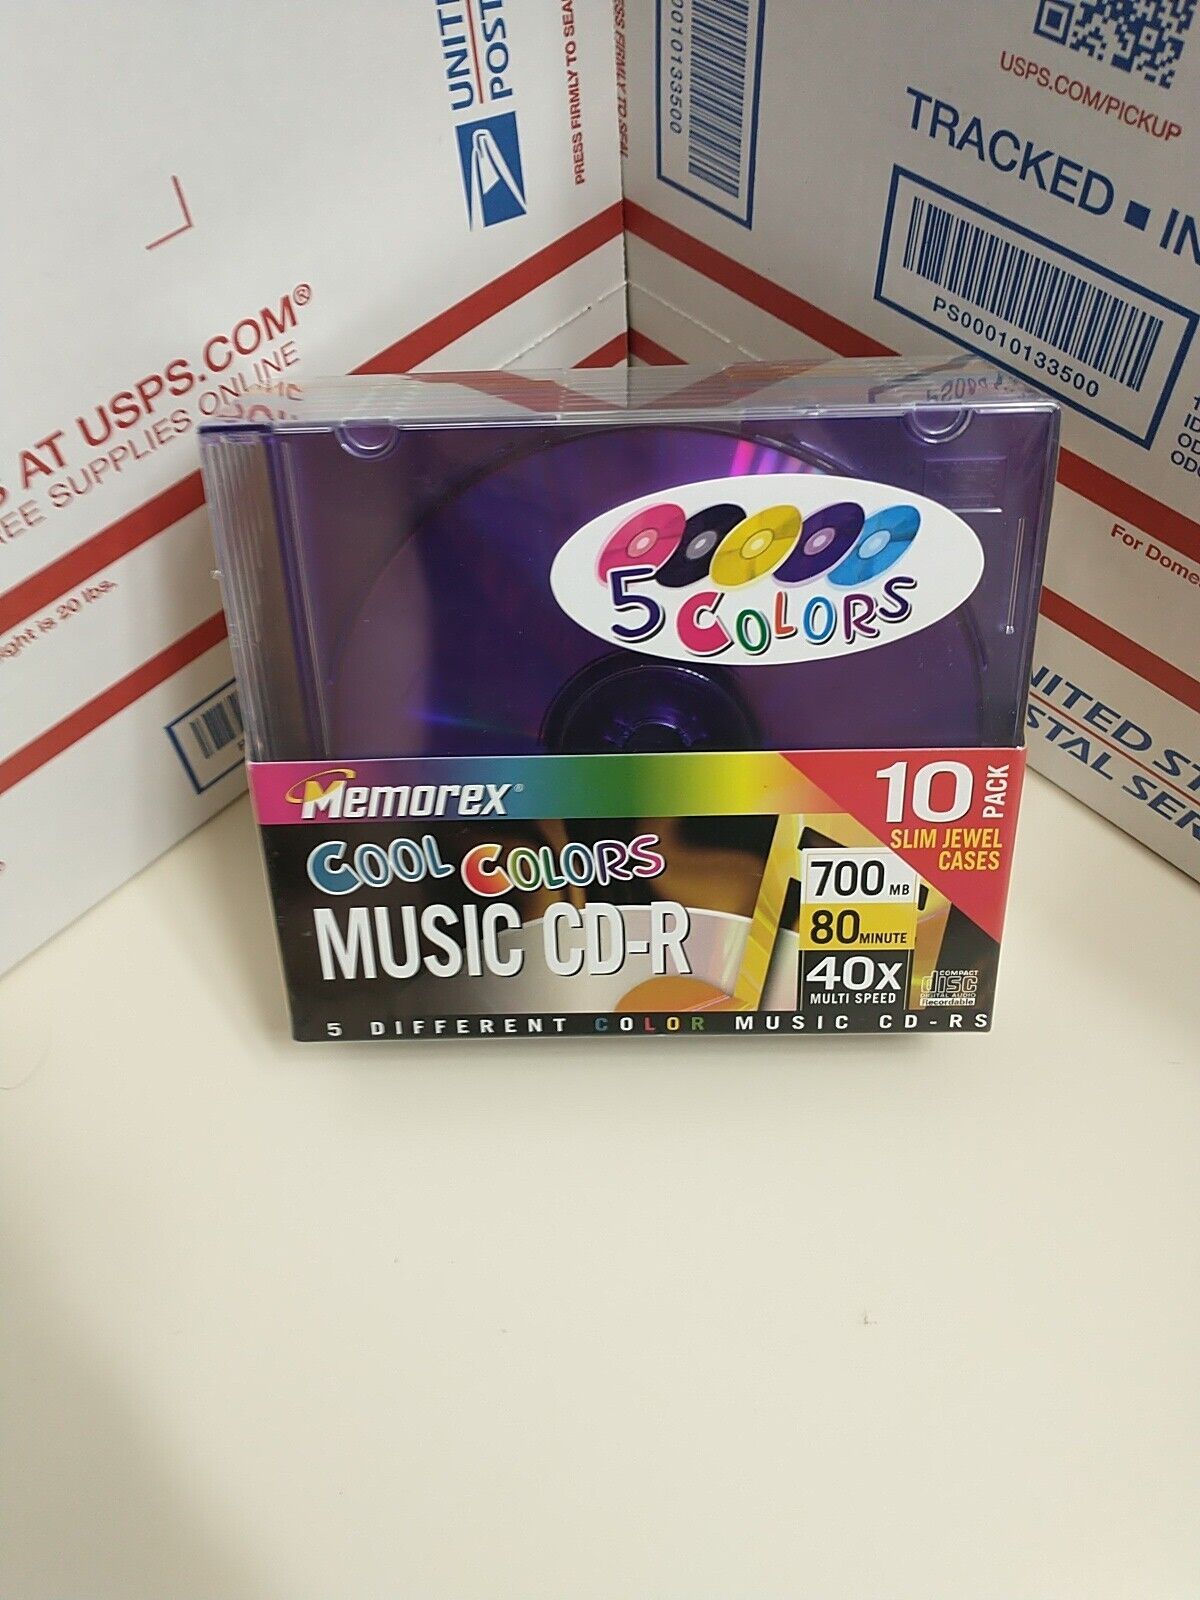 Memorex Music CD-R Cool Colors 10pk  40X 700MB 80 Min Recordable NEW SEALED